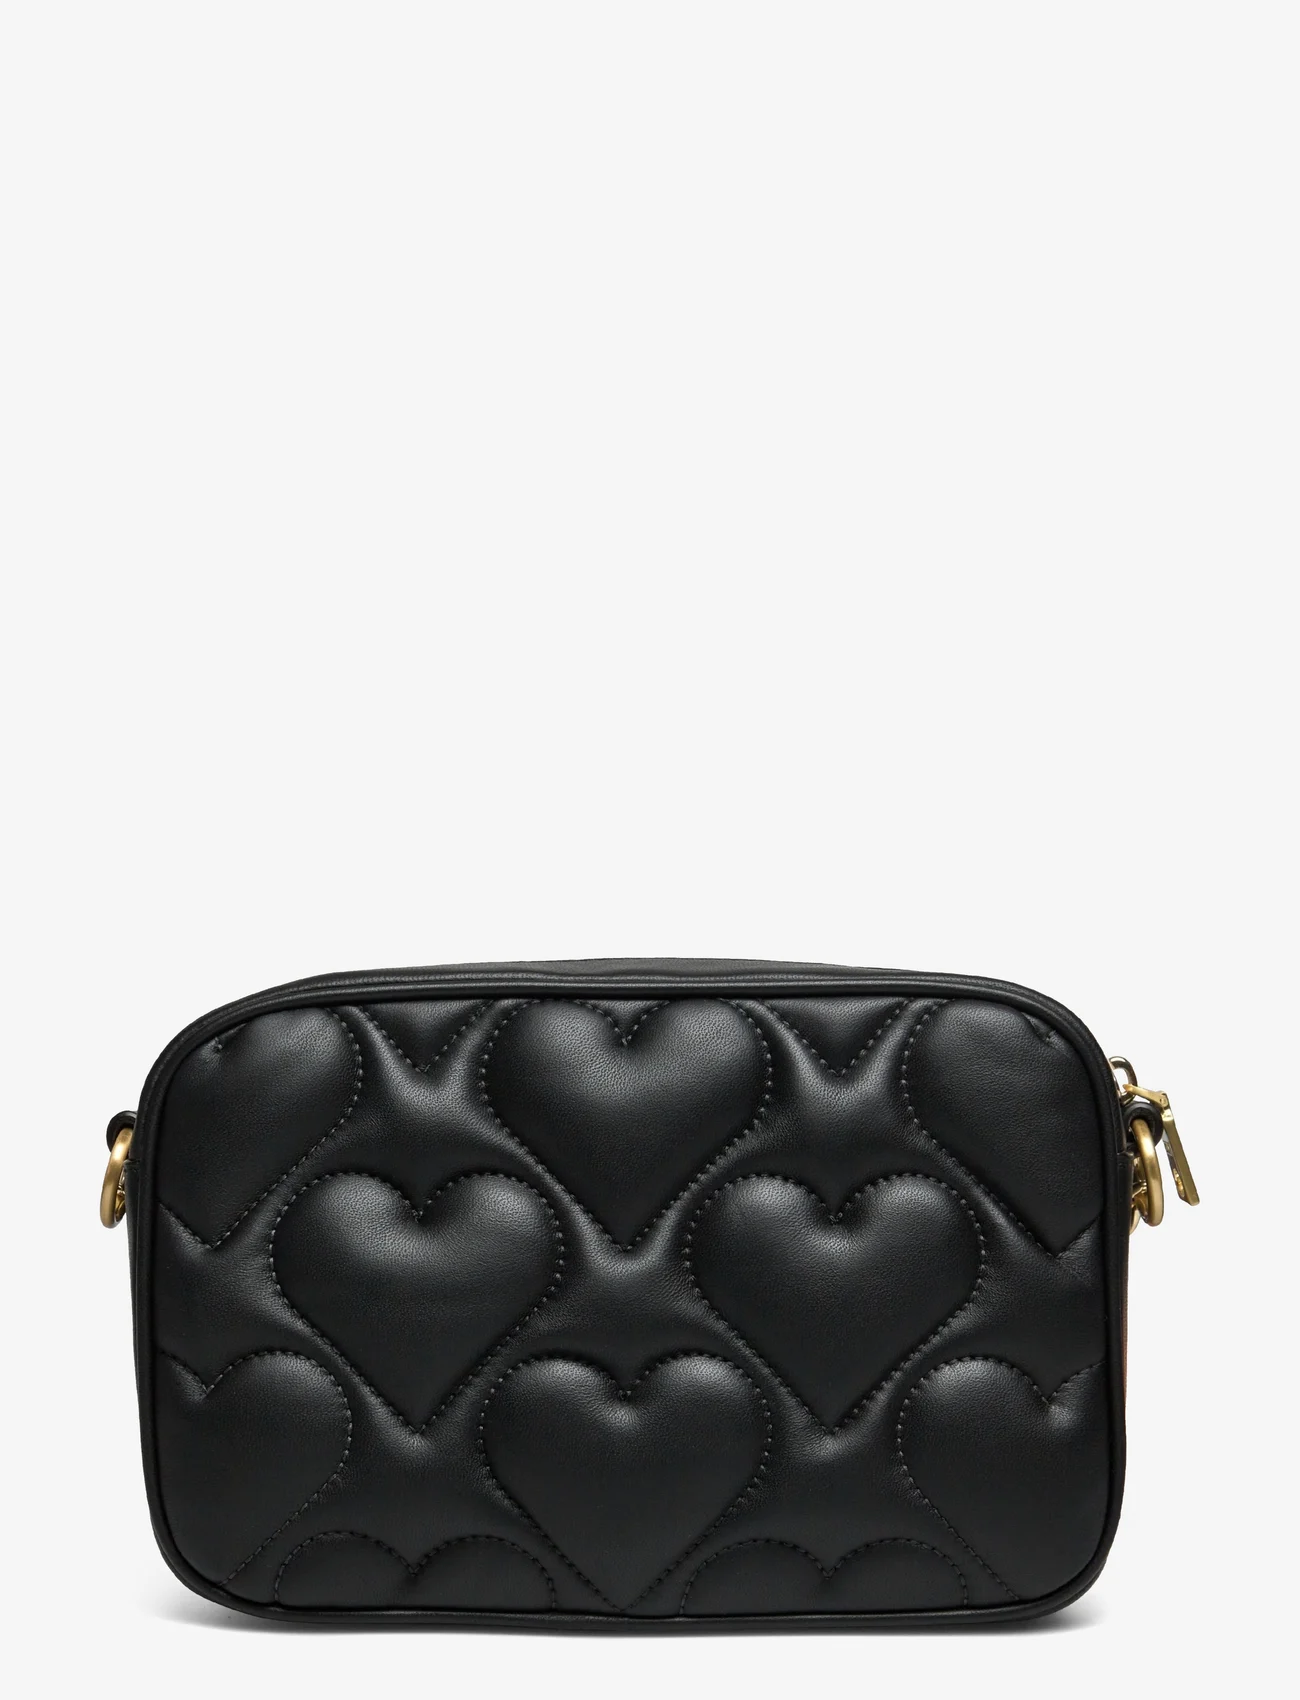 DKNY Bags - HEART OF NY QUILTED BAG - konfirmation - bgd - blk/gold - 1